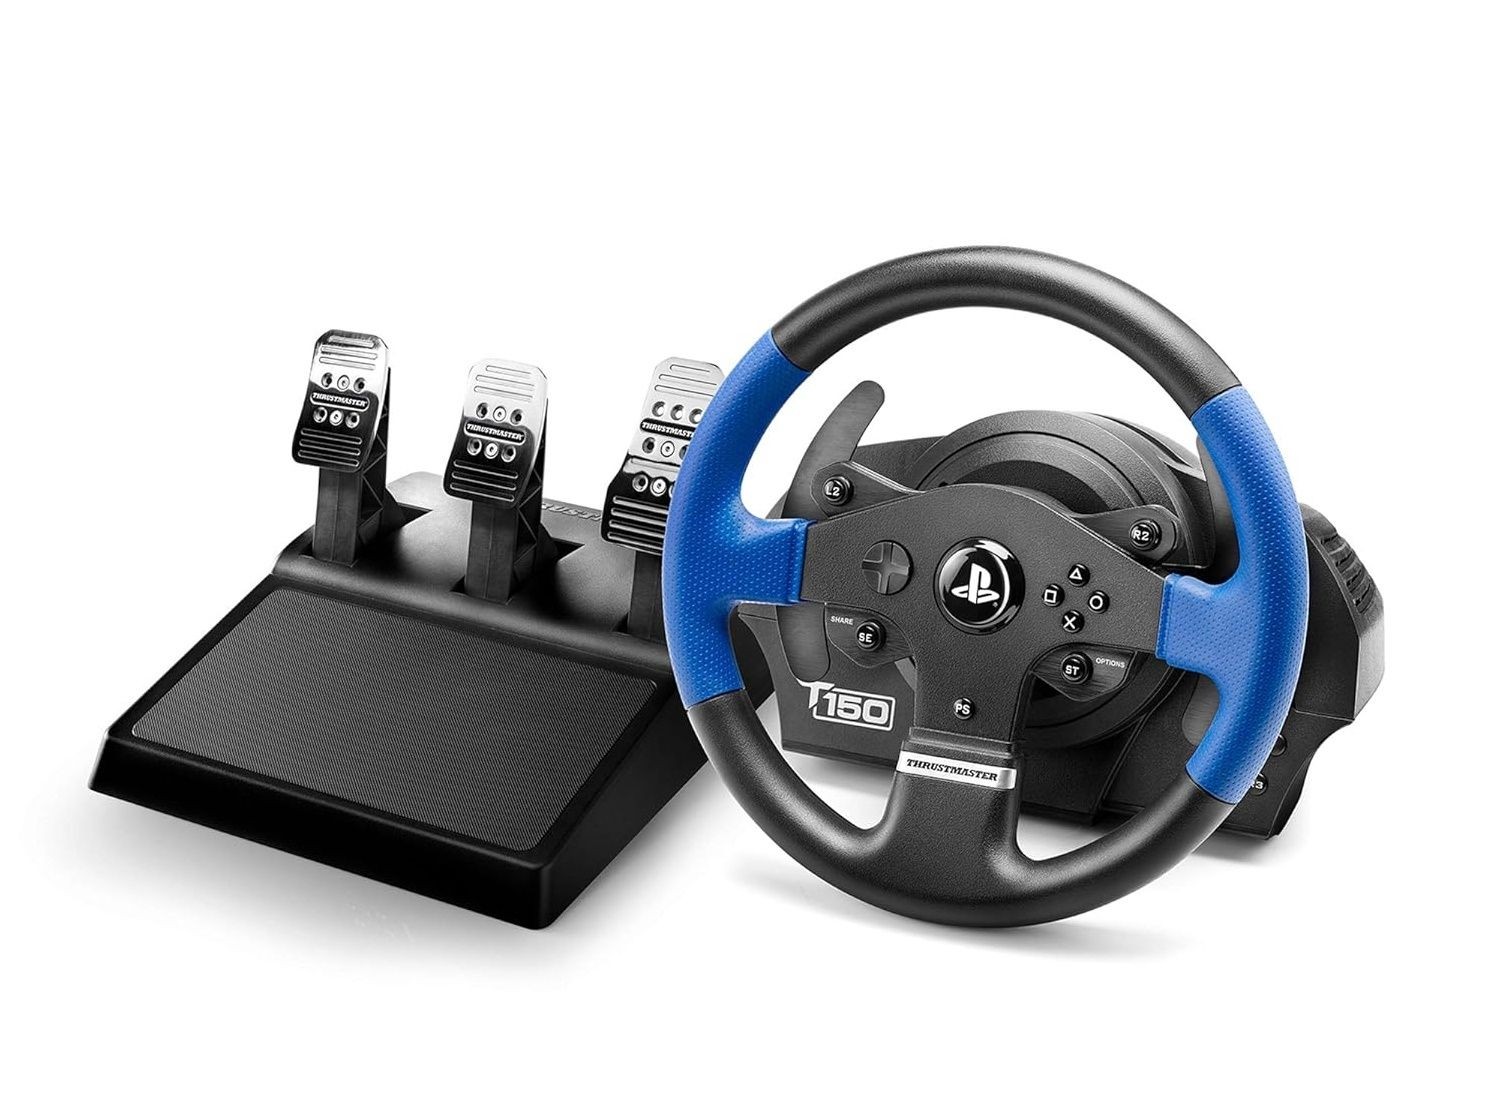 "Thrustmaster T150 Pro racing wheel and pedal set for gaming enthusiasts."